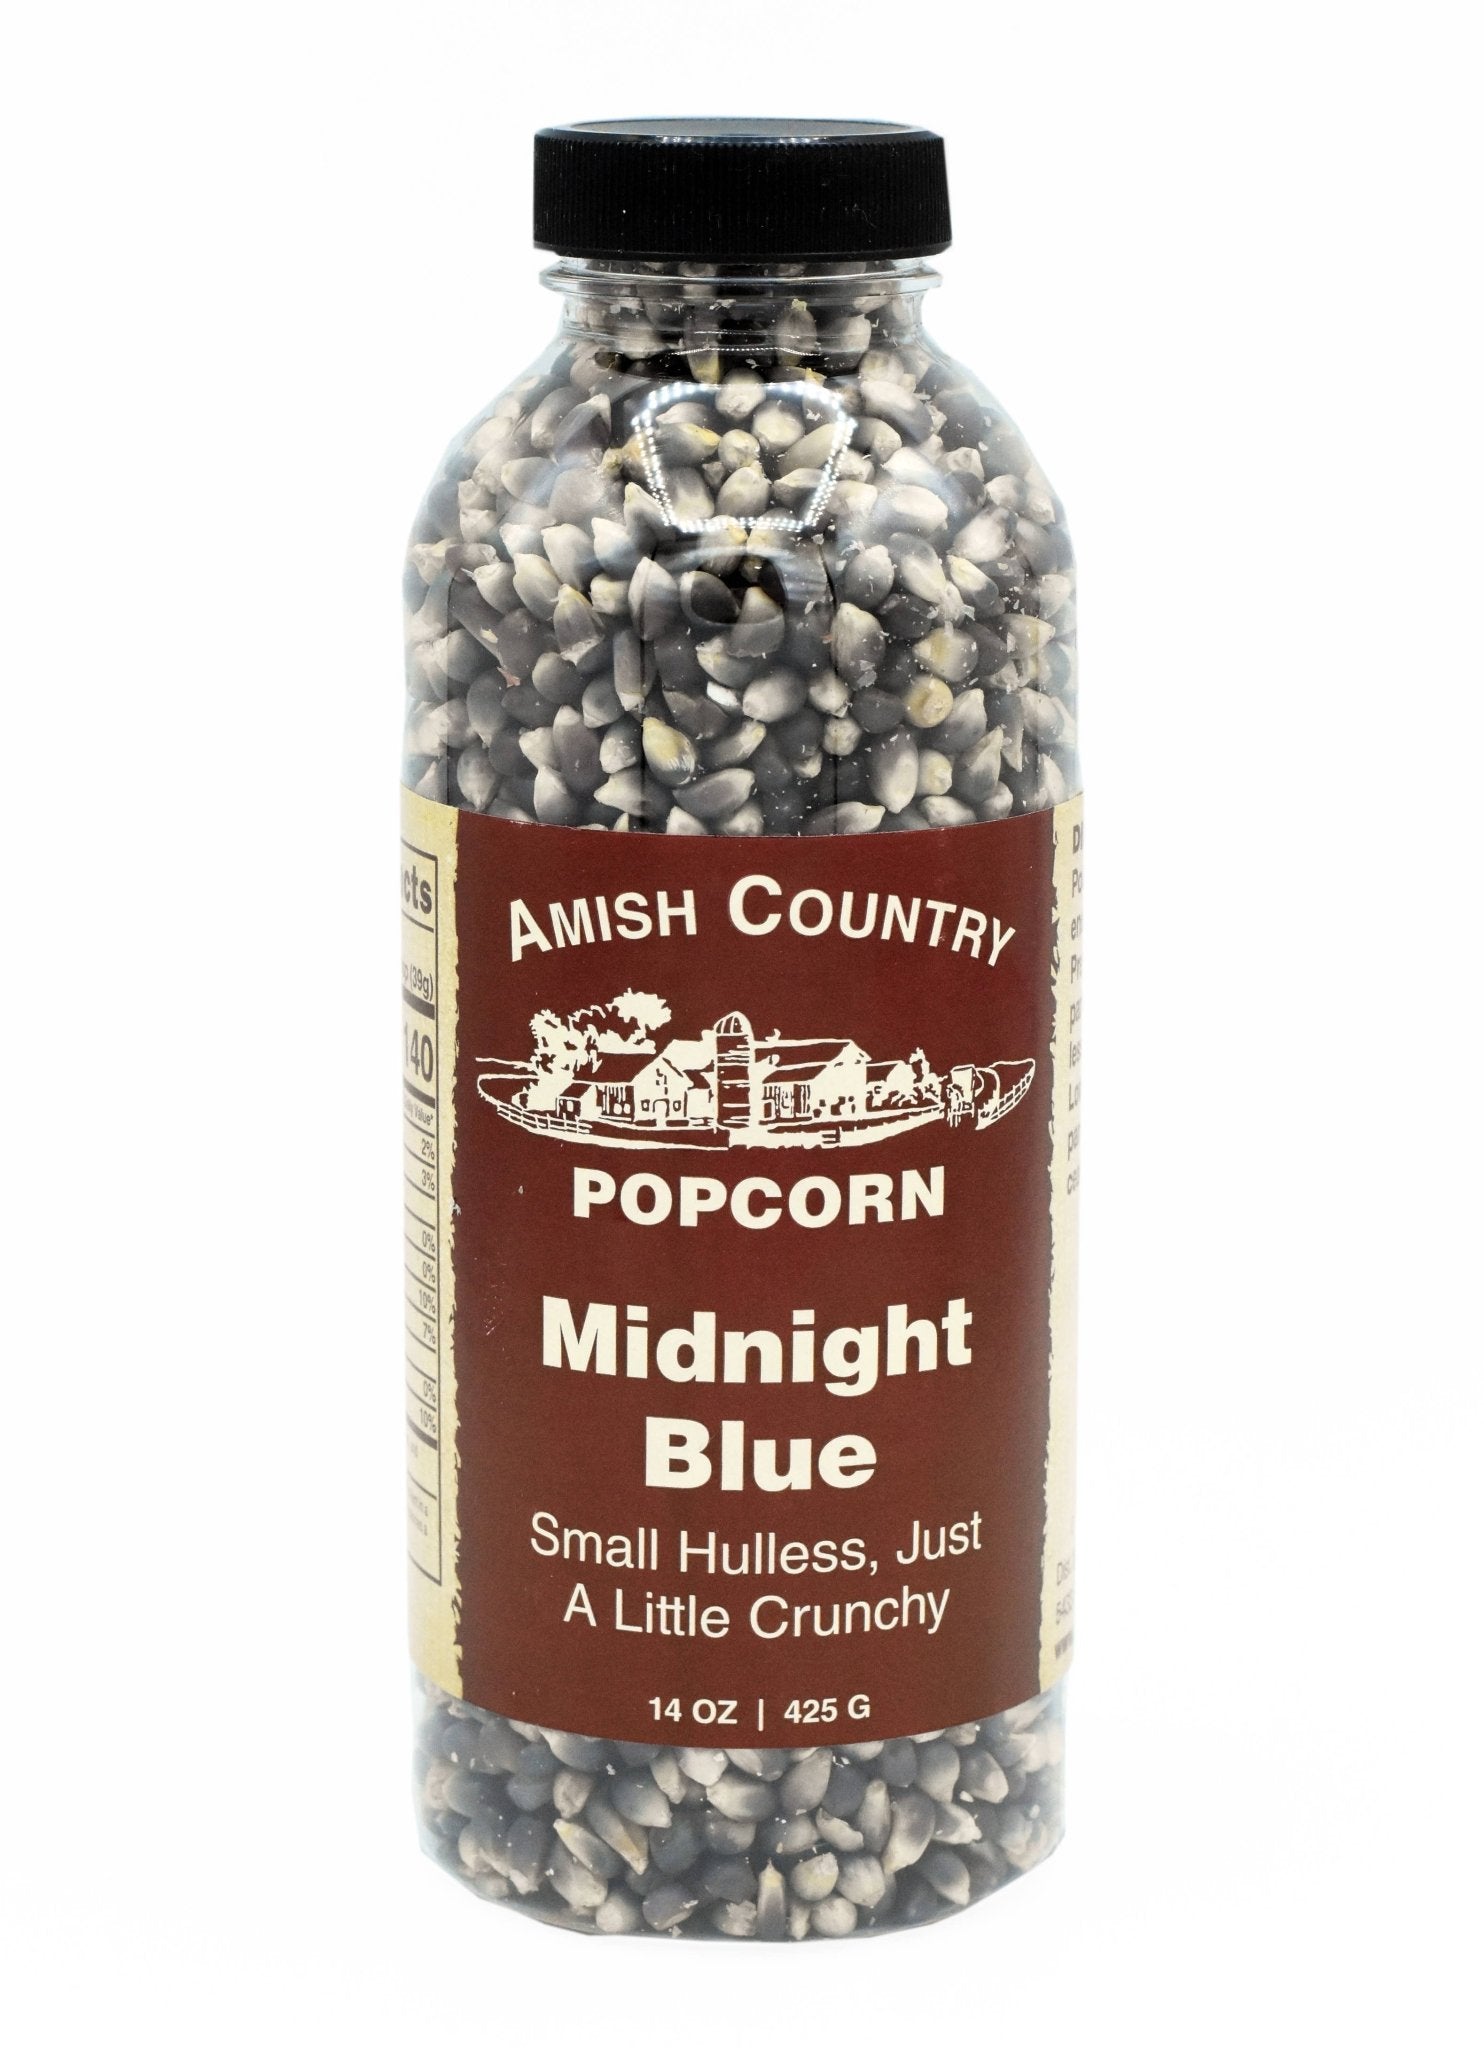 Amish Country Popcorn - 14oz Bottle of Midnight Blue Popcorn - Pacific Flyway Supplies